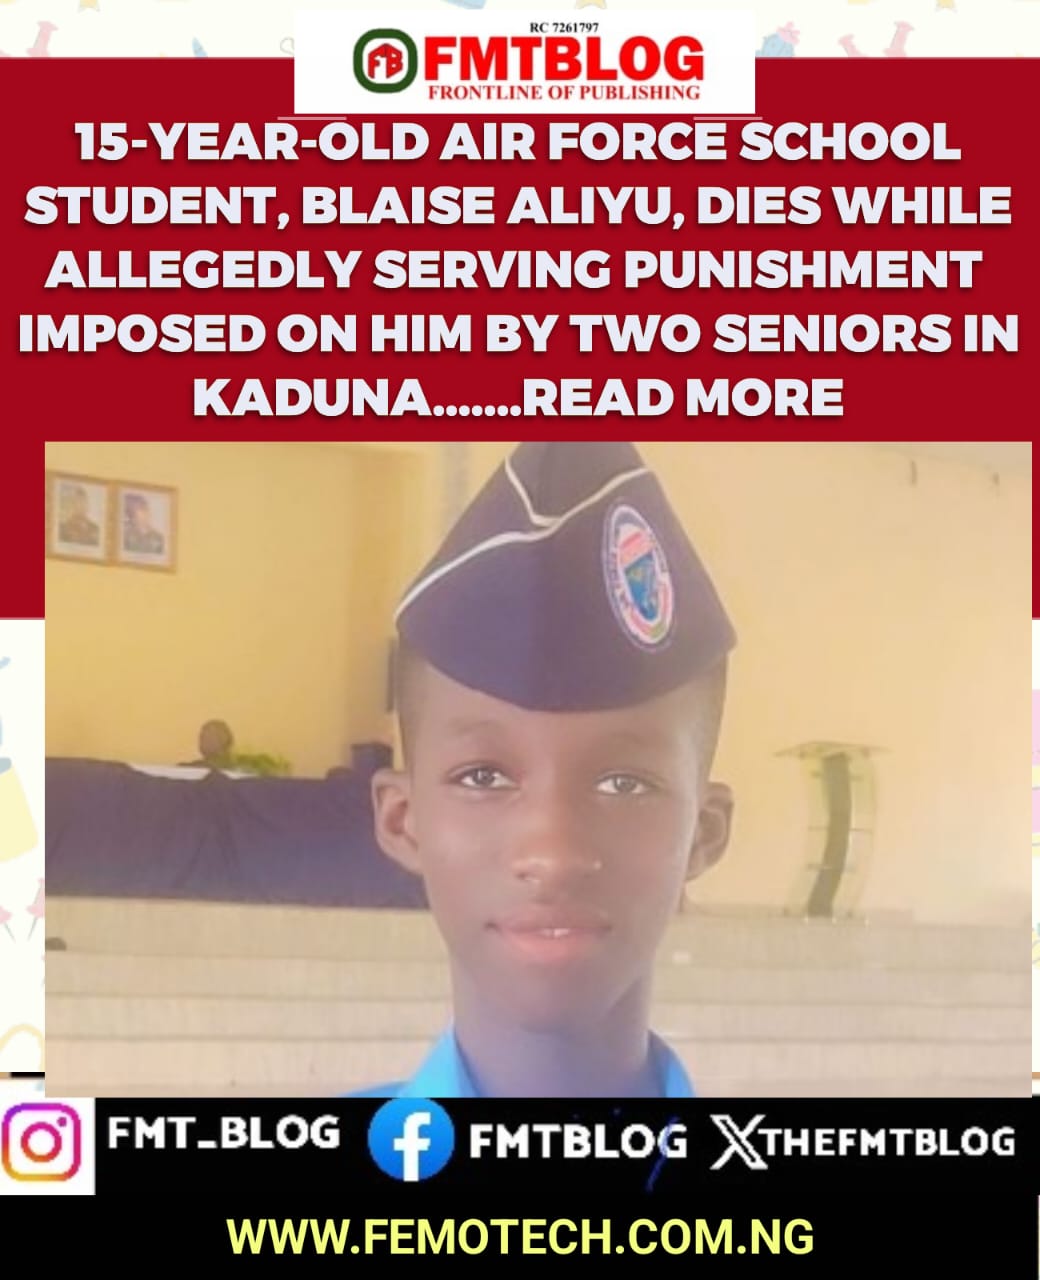 15-Year-Old Air Force School Student, Blaise Aliyu, Dies While Allegedly Serving Punishment Imposed On Him By Two Seniors In Kaduna